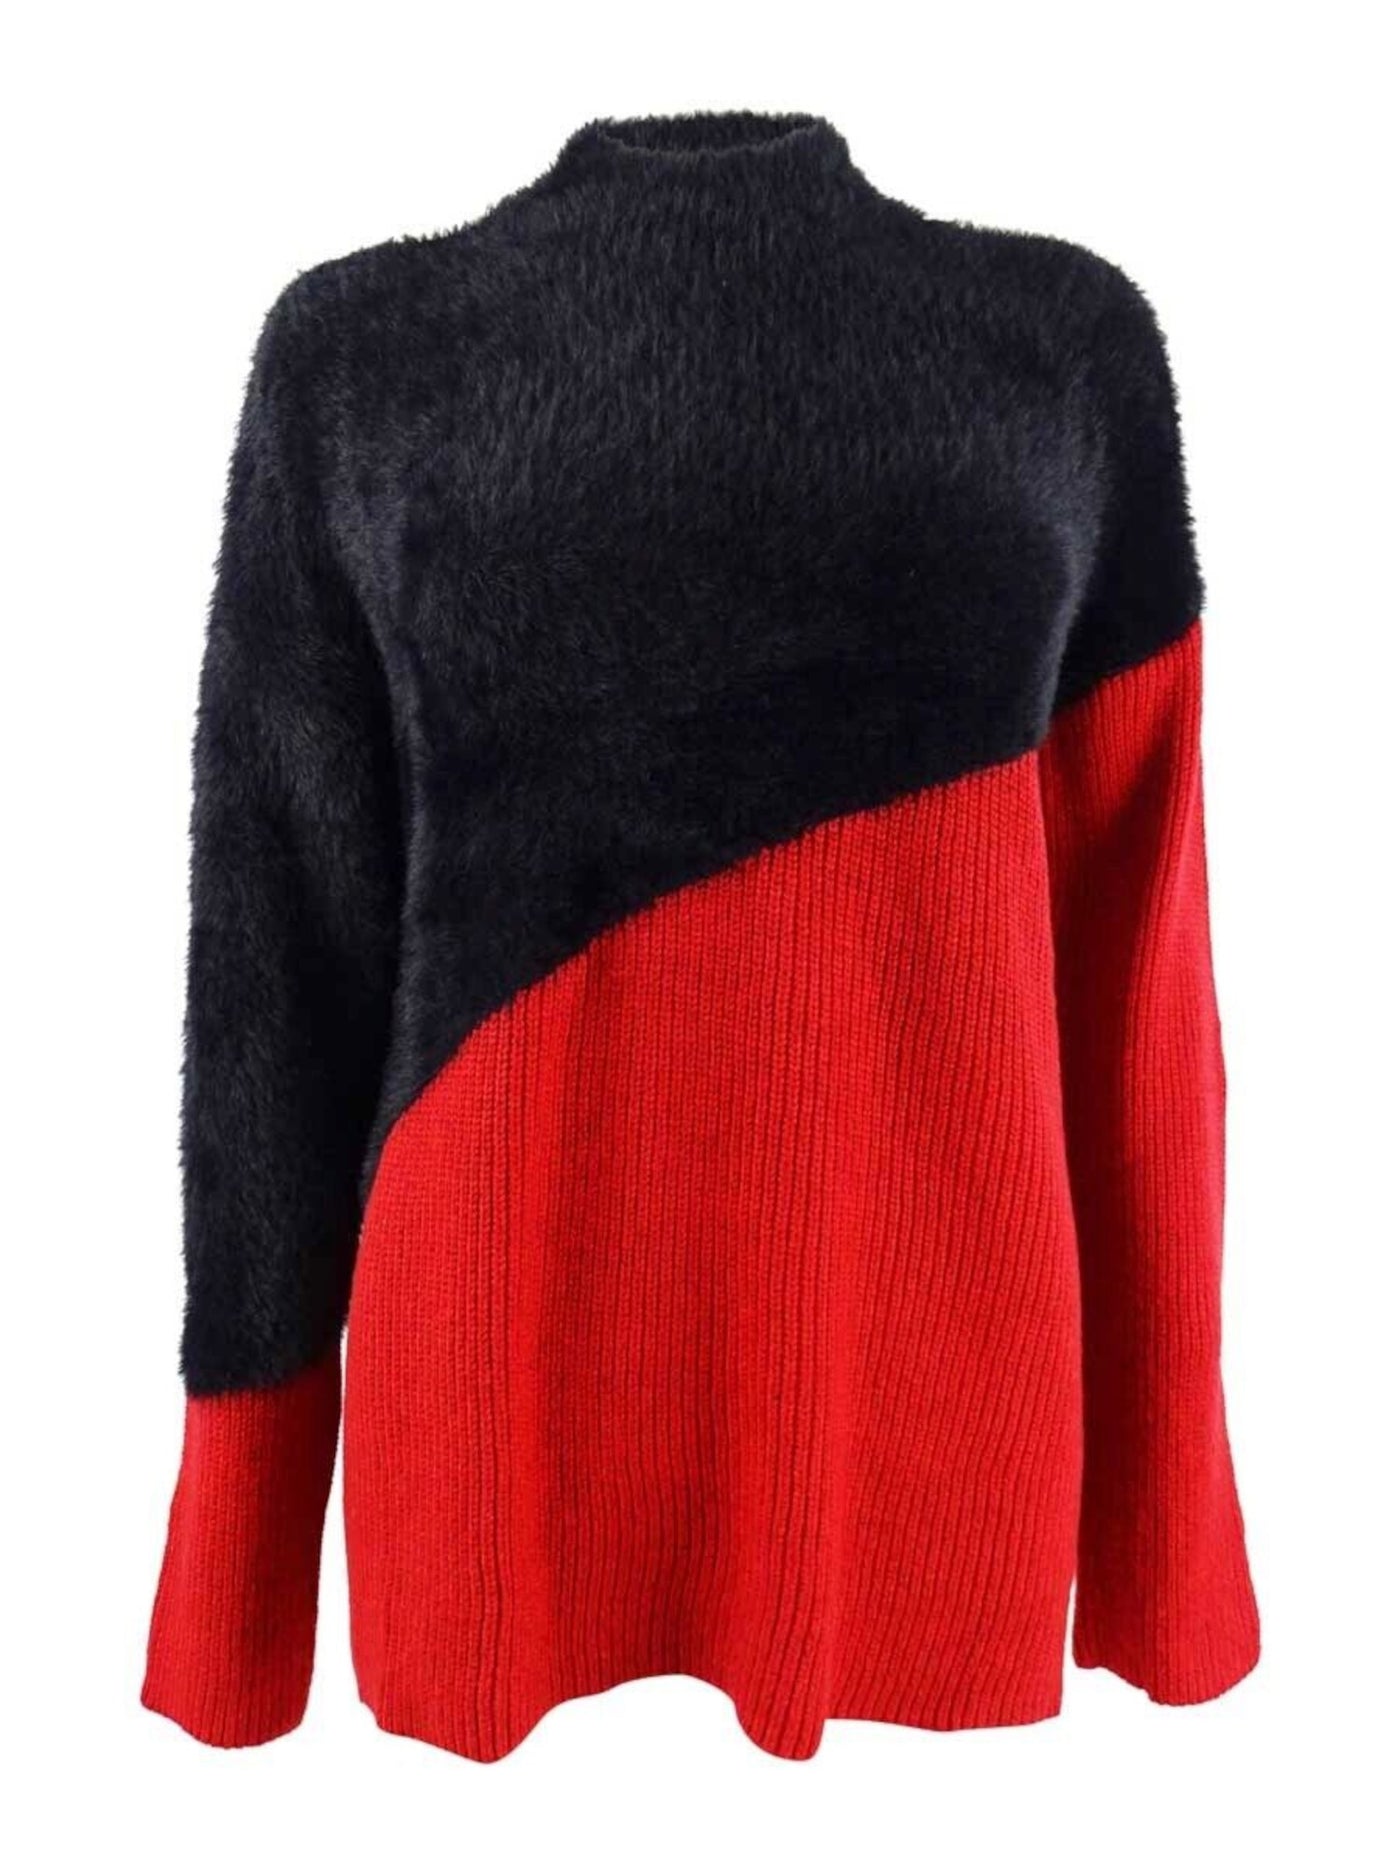 VINCE CAMUTO Womens Red Textured Ribbed Long Sleeve Mock Neck Wear To Work Sweater S